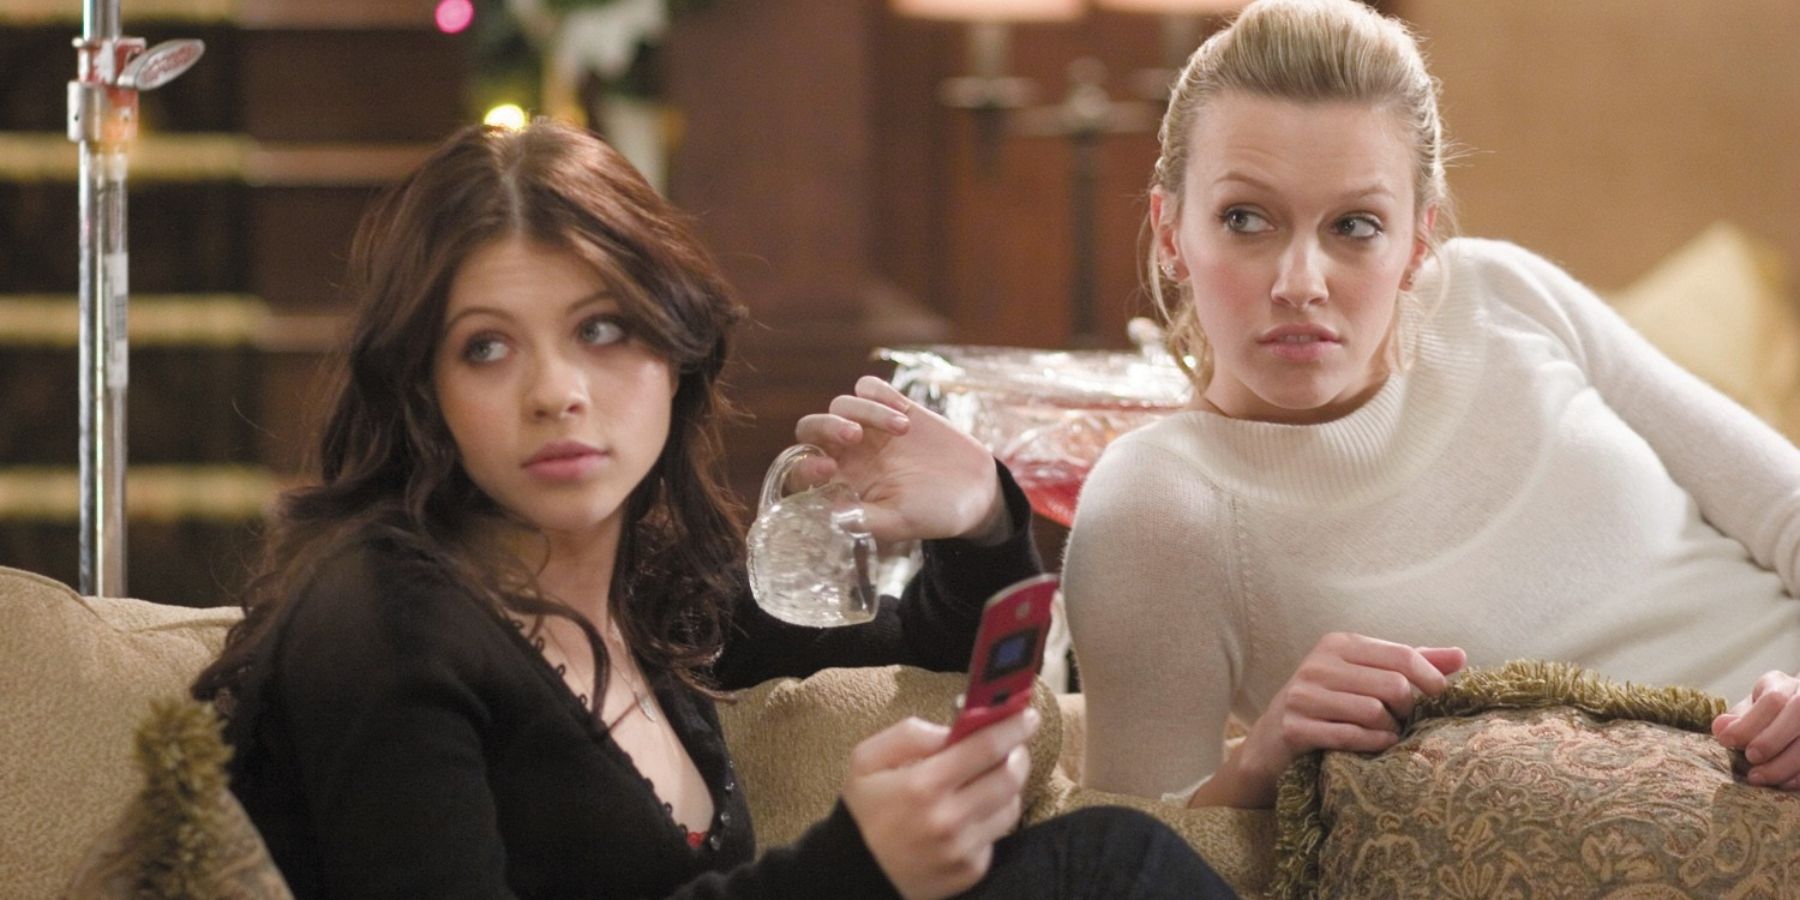 Melissa (Michelle Tratchenberg) and Kelli (Katie Cassidy) in Black Christmas (2006)